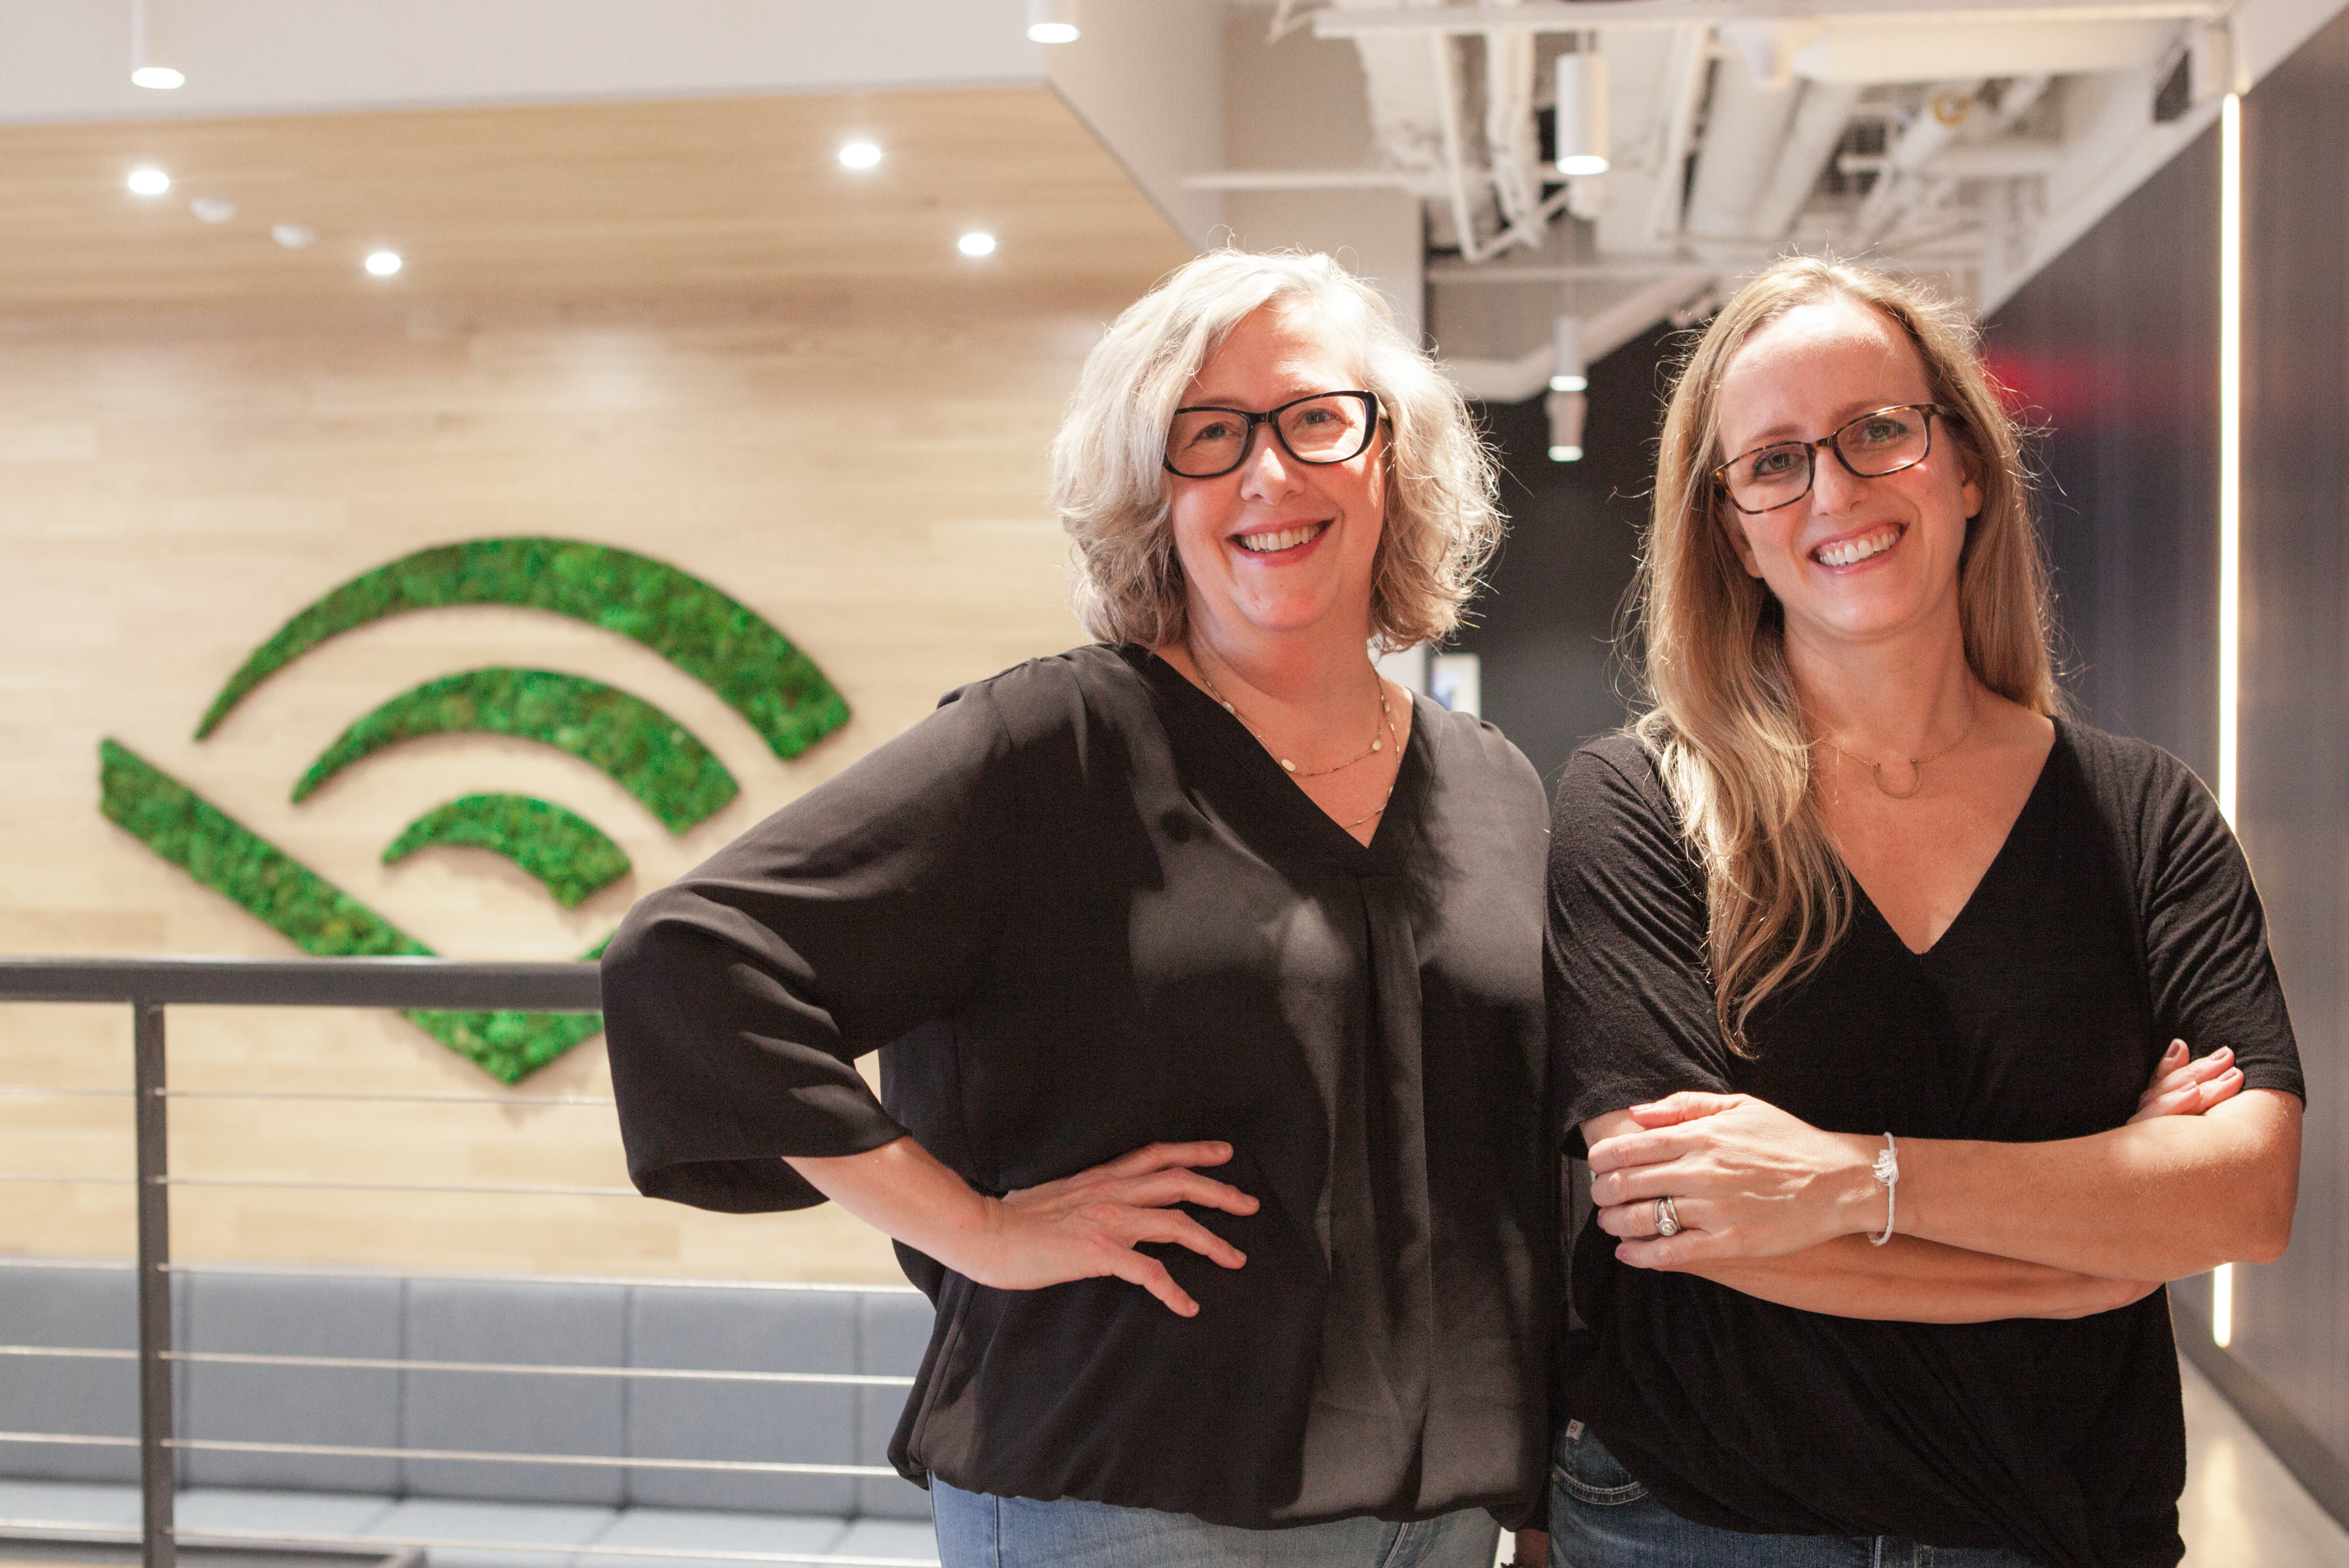 Audible editors Tricia Ford and Emily Cox stand side by side in Audible's office. They are looking directly at the camera and smiling. Both are wearing glasses, black v-neck shirts and jeans. In the background is a staircase and on the wall the Audible chevron carved into the wall in green moss.